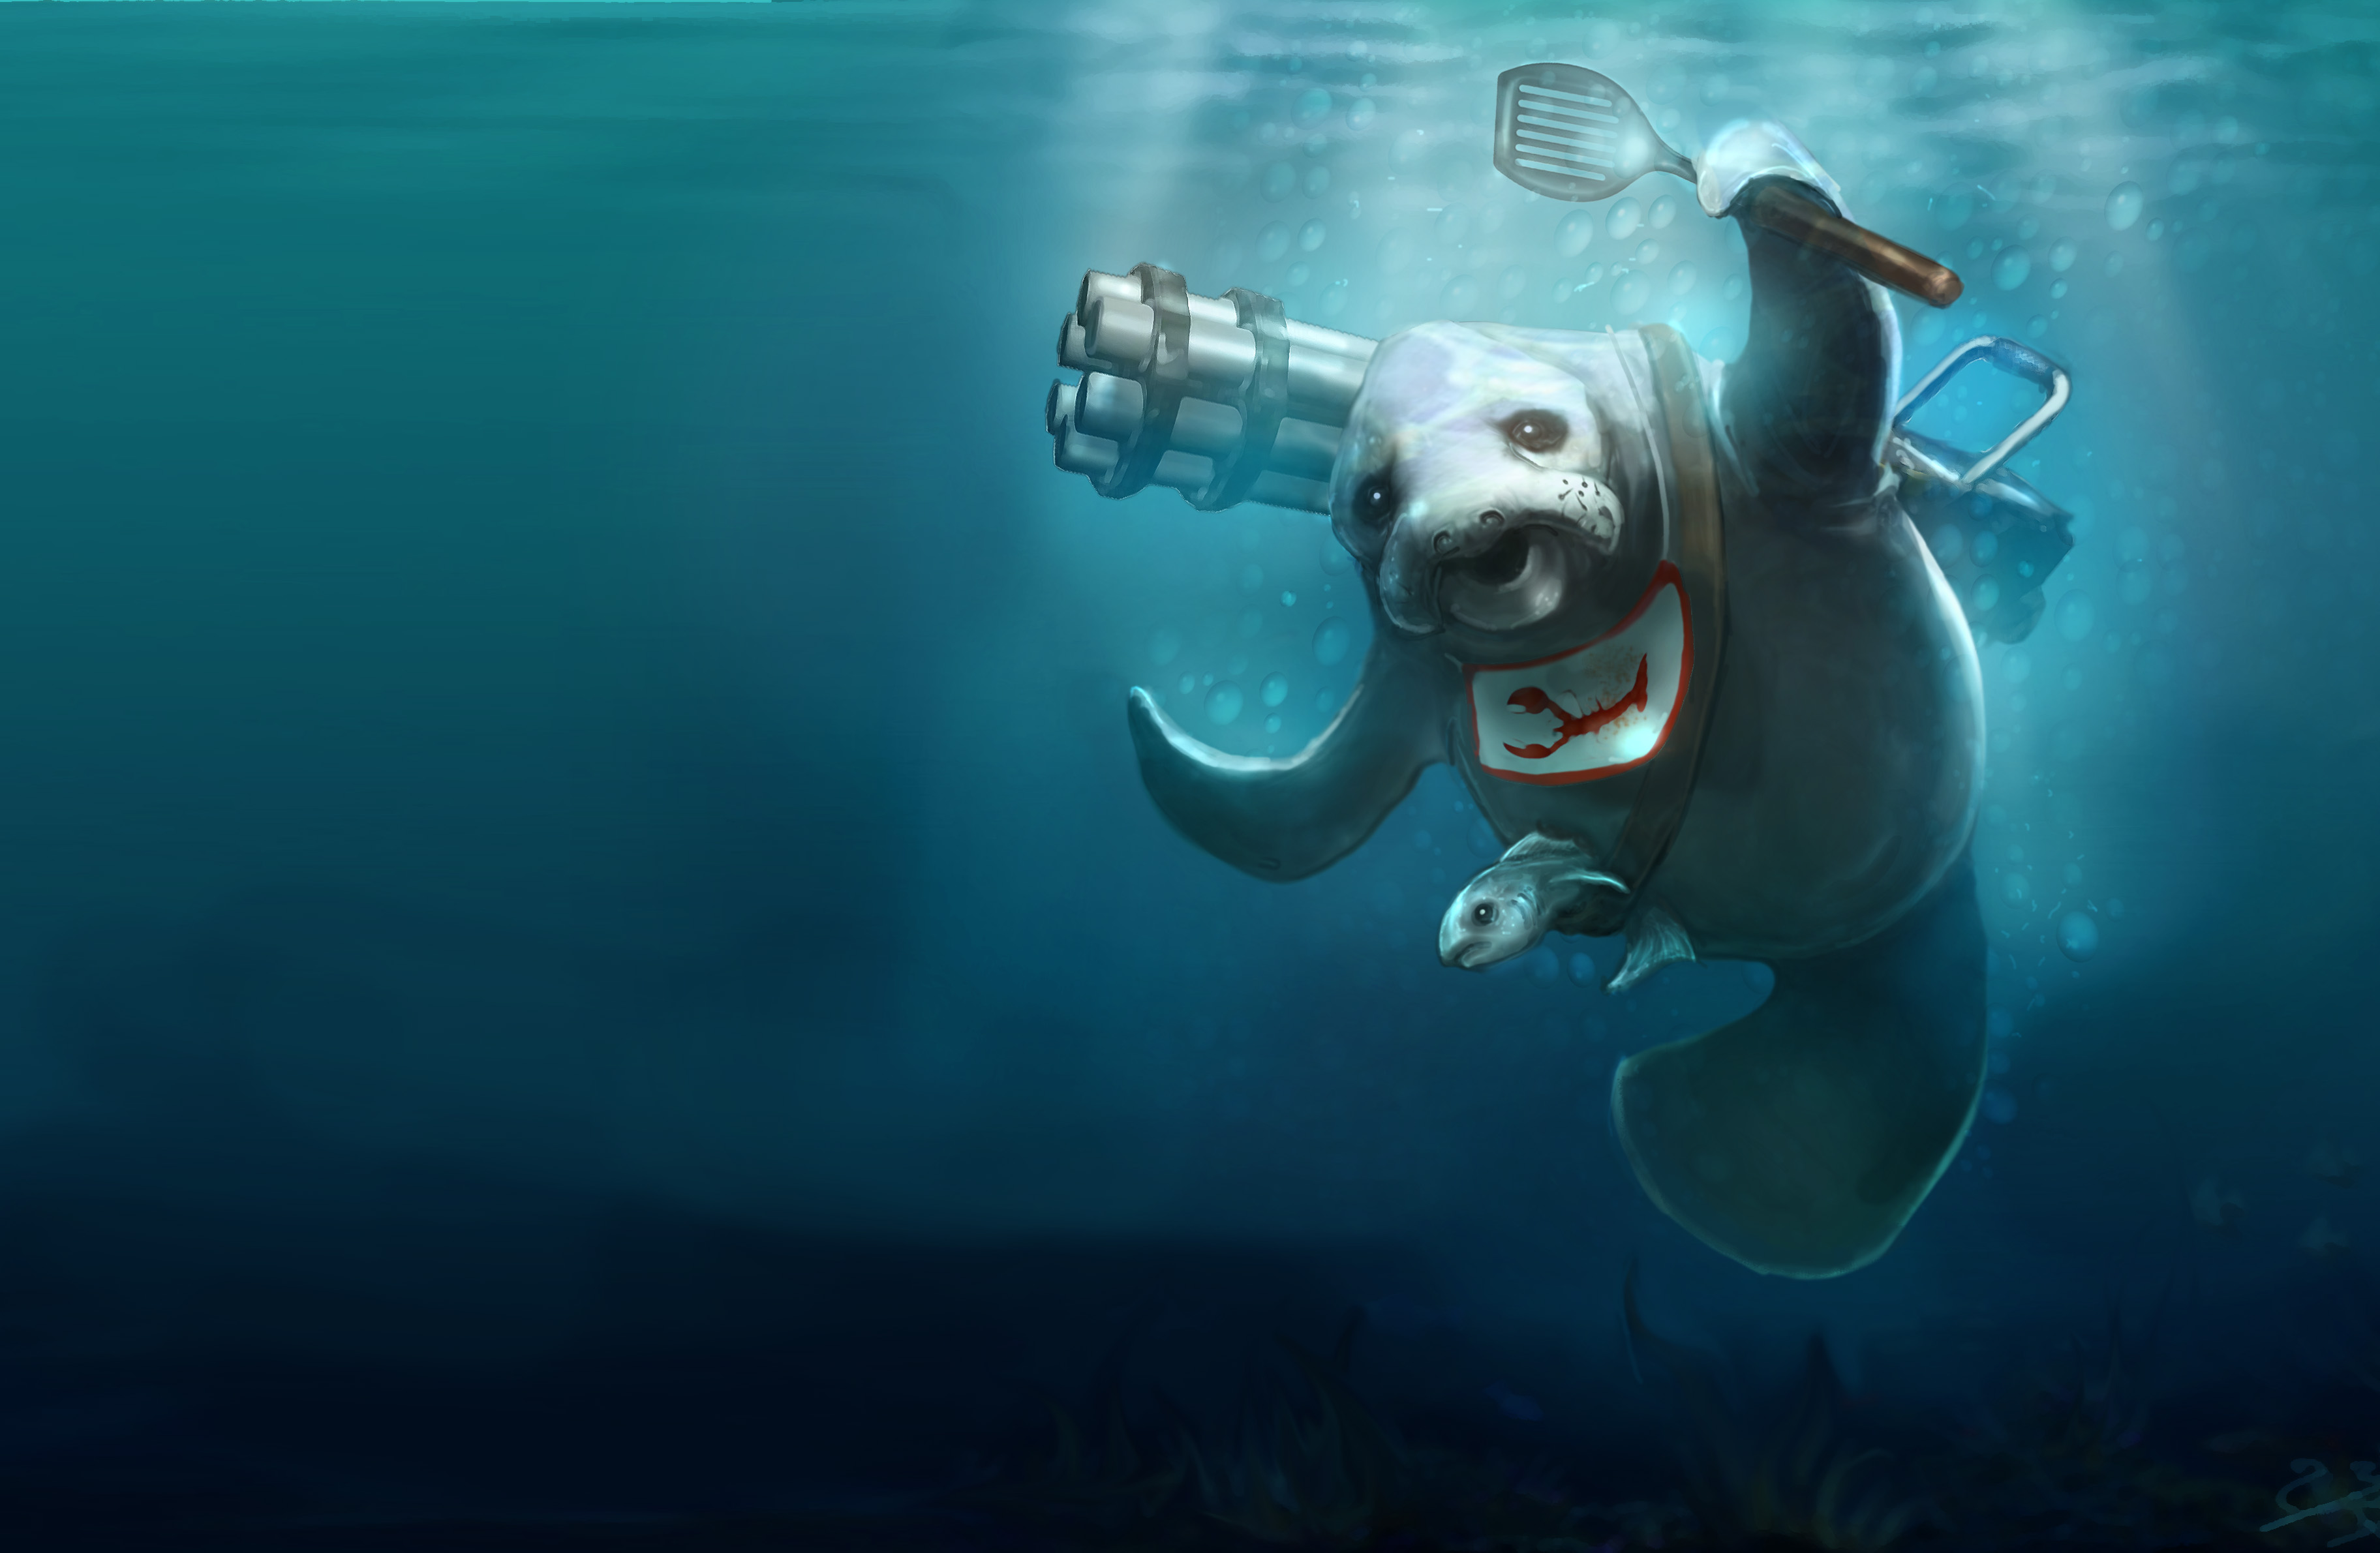 Urf League of Legends Wiki Champions, Items, Strategies, and many more!